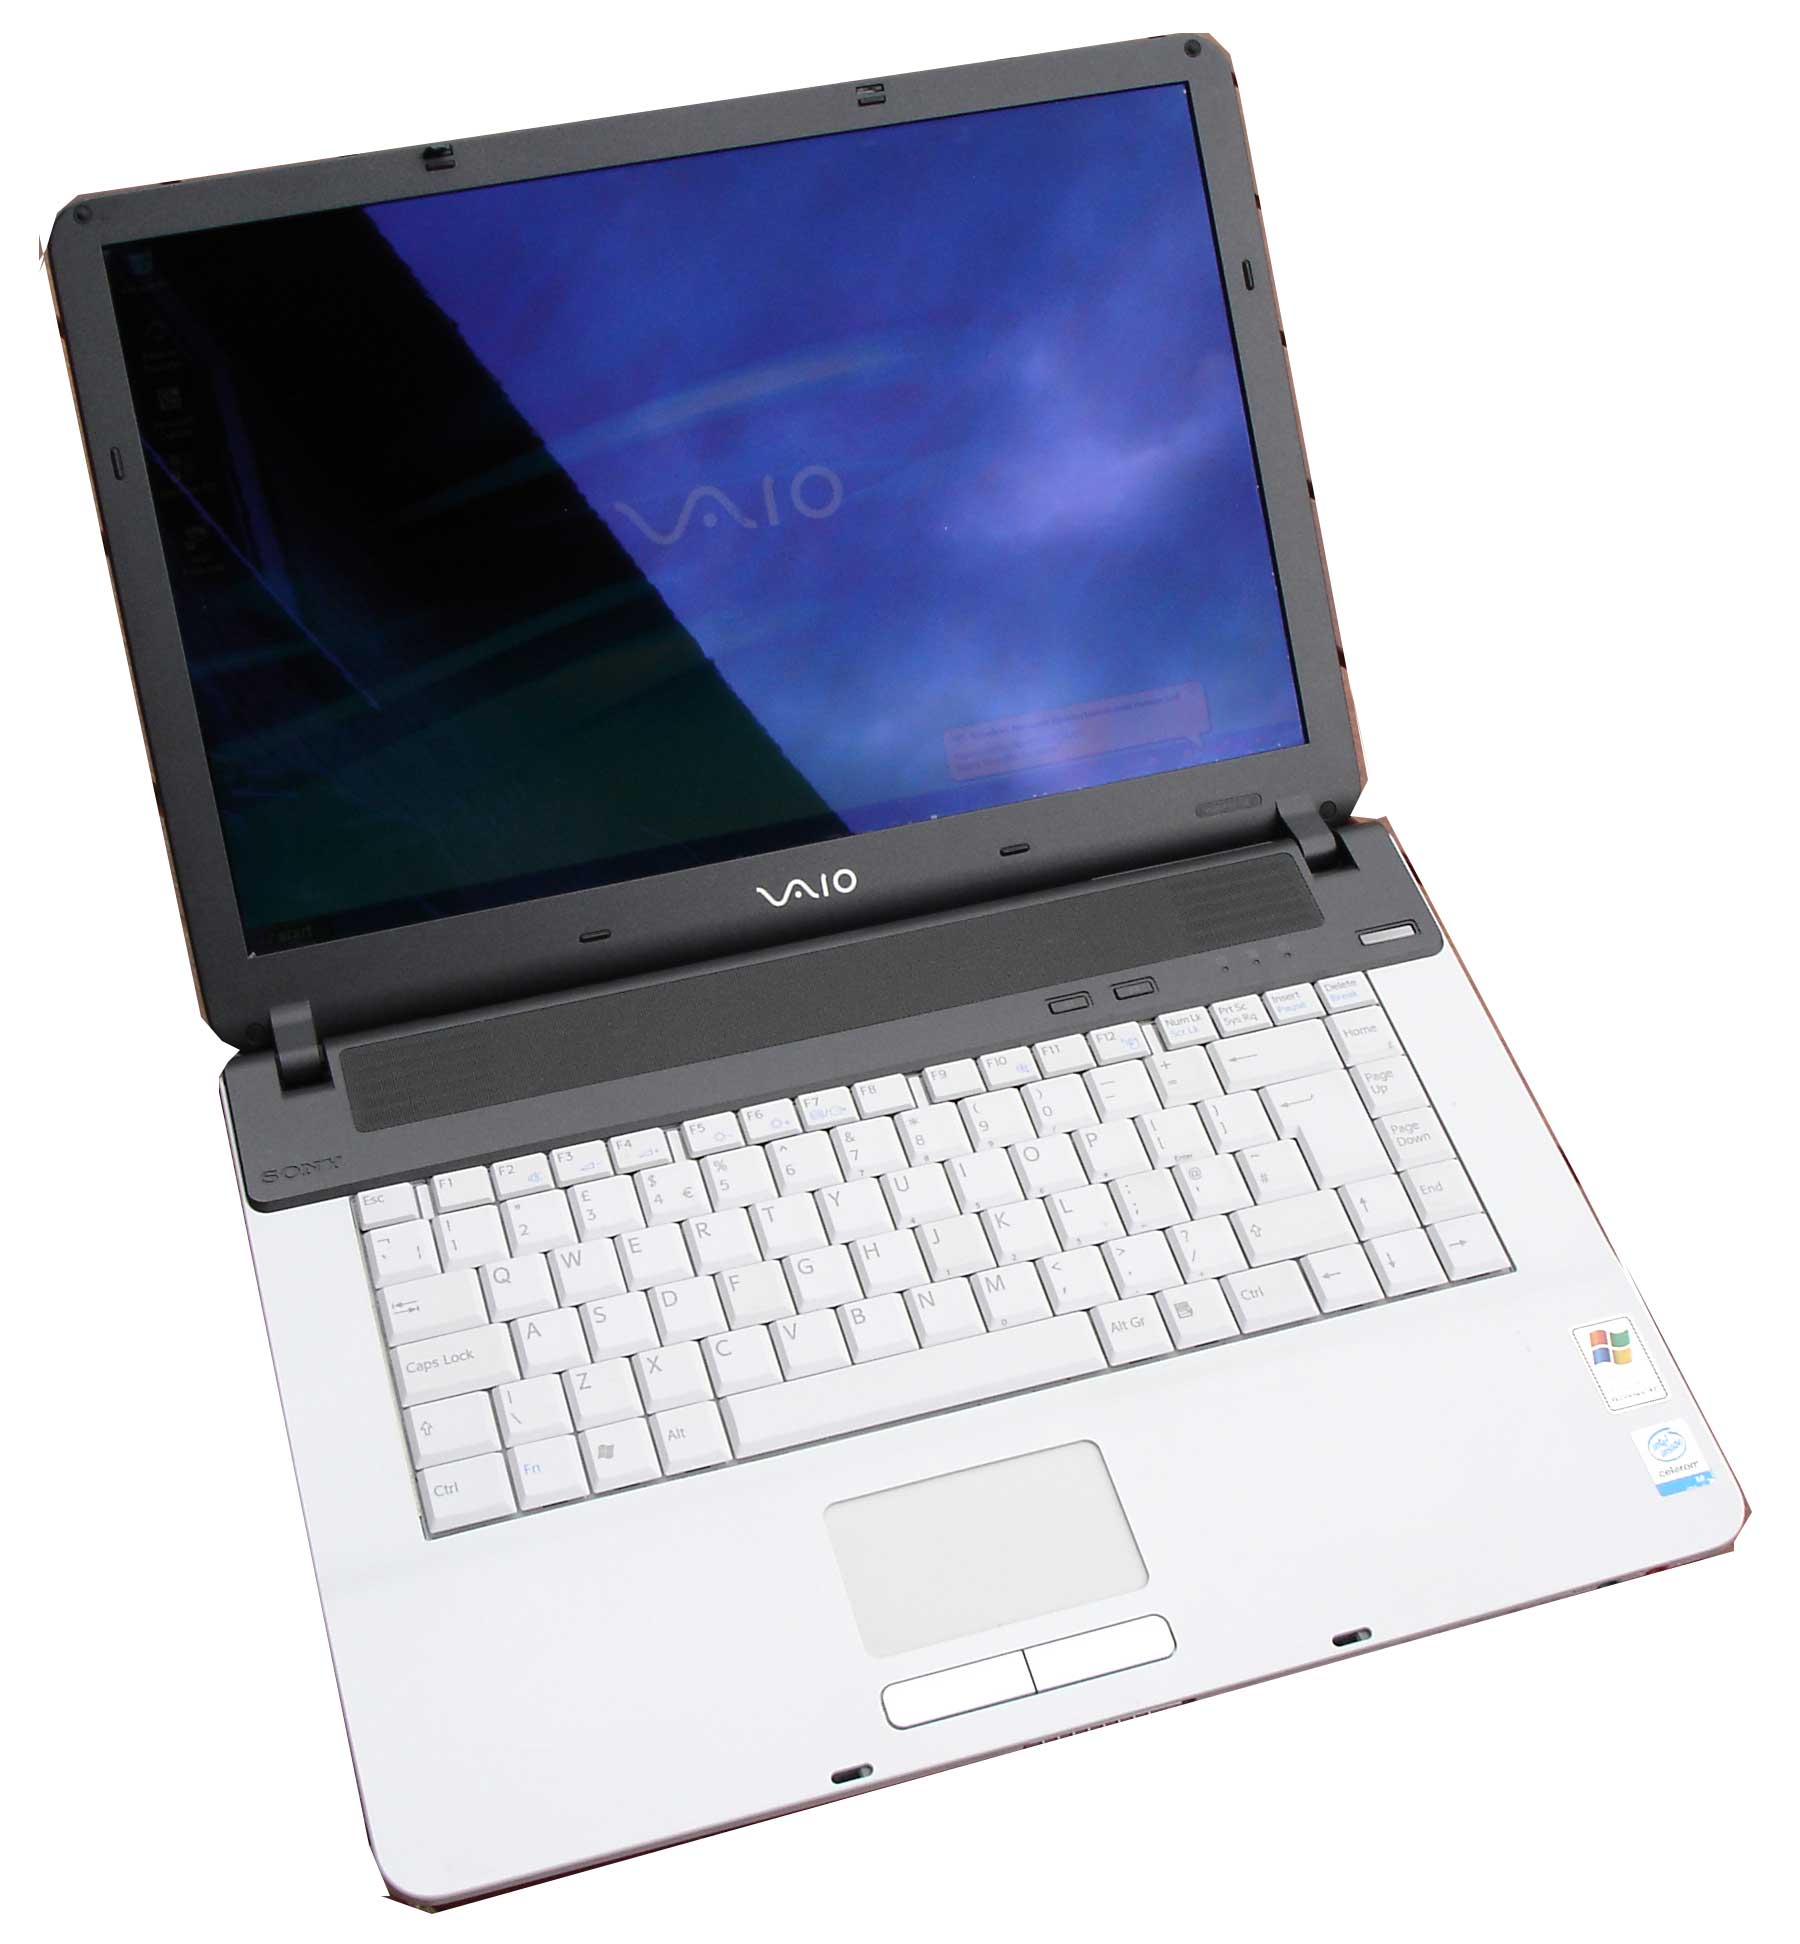 Sony VAIO Driver 1 click to download all Sony VAIO drivers!